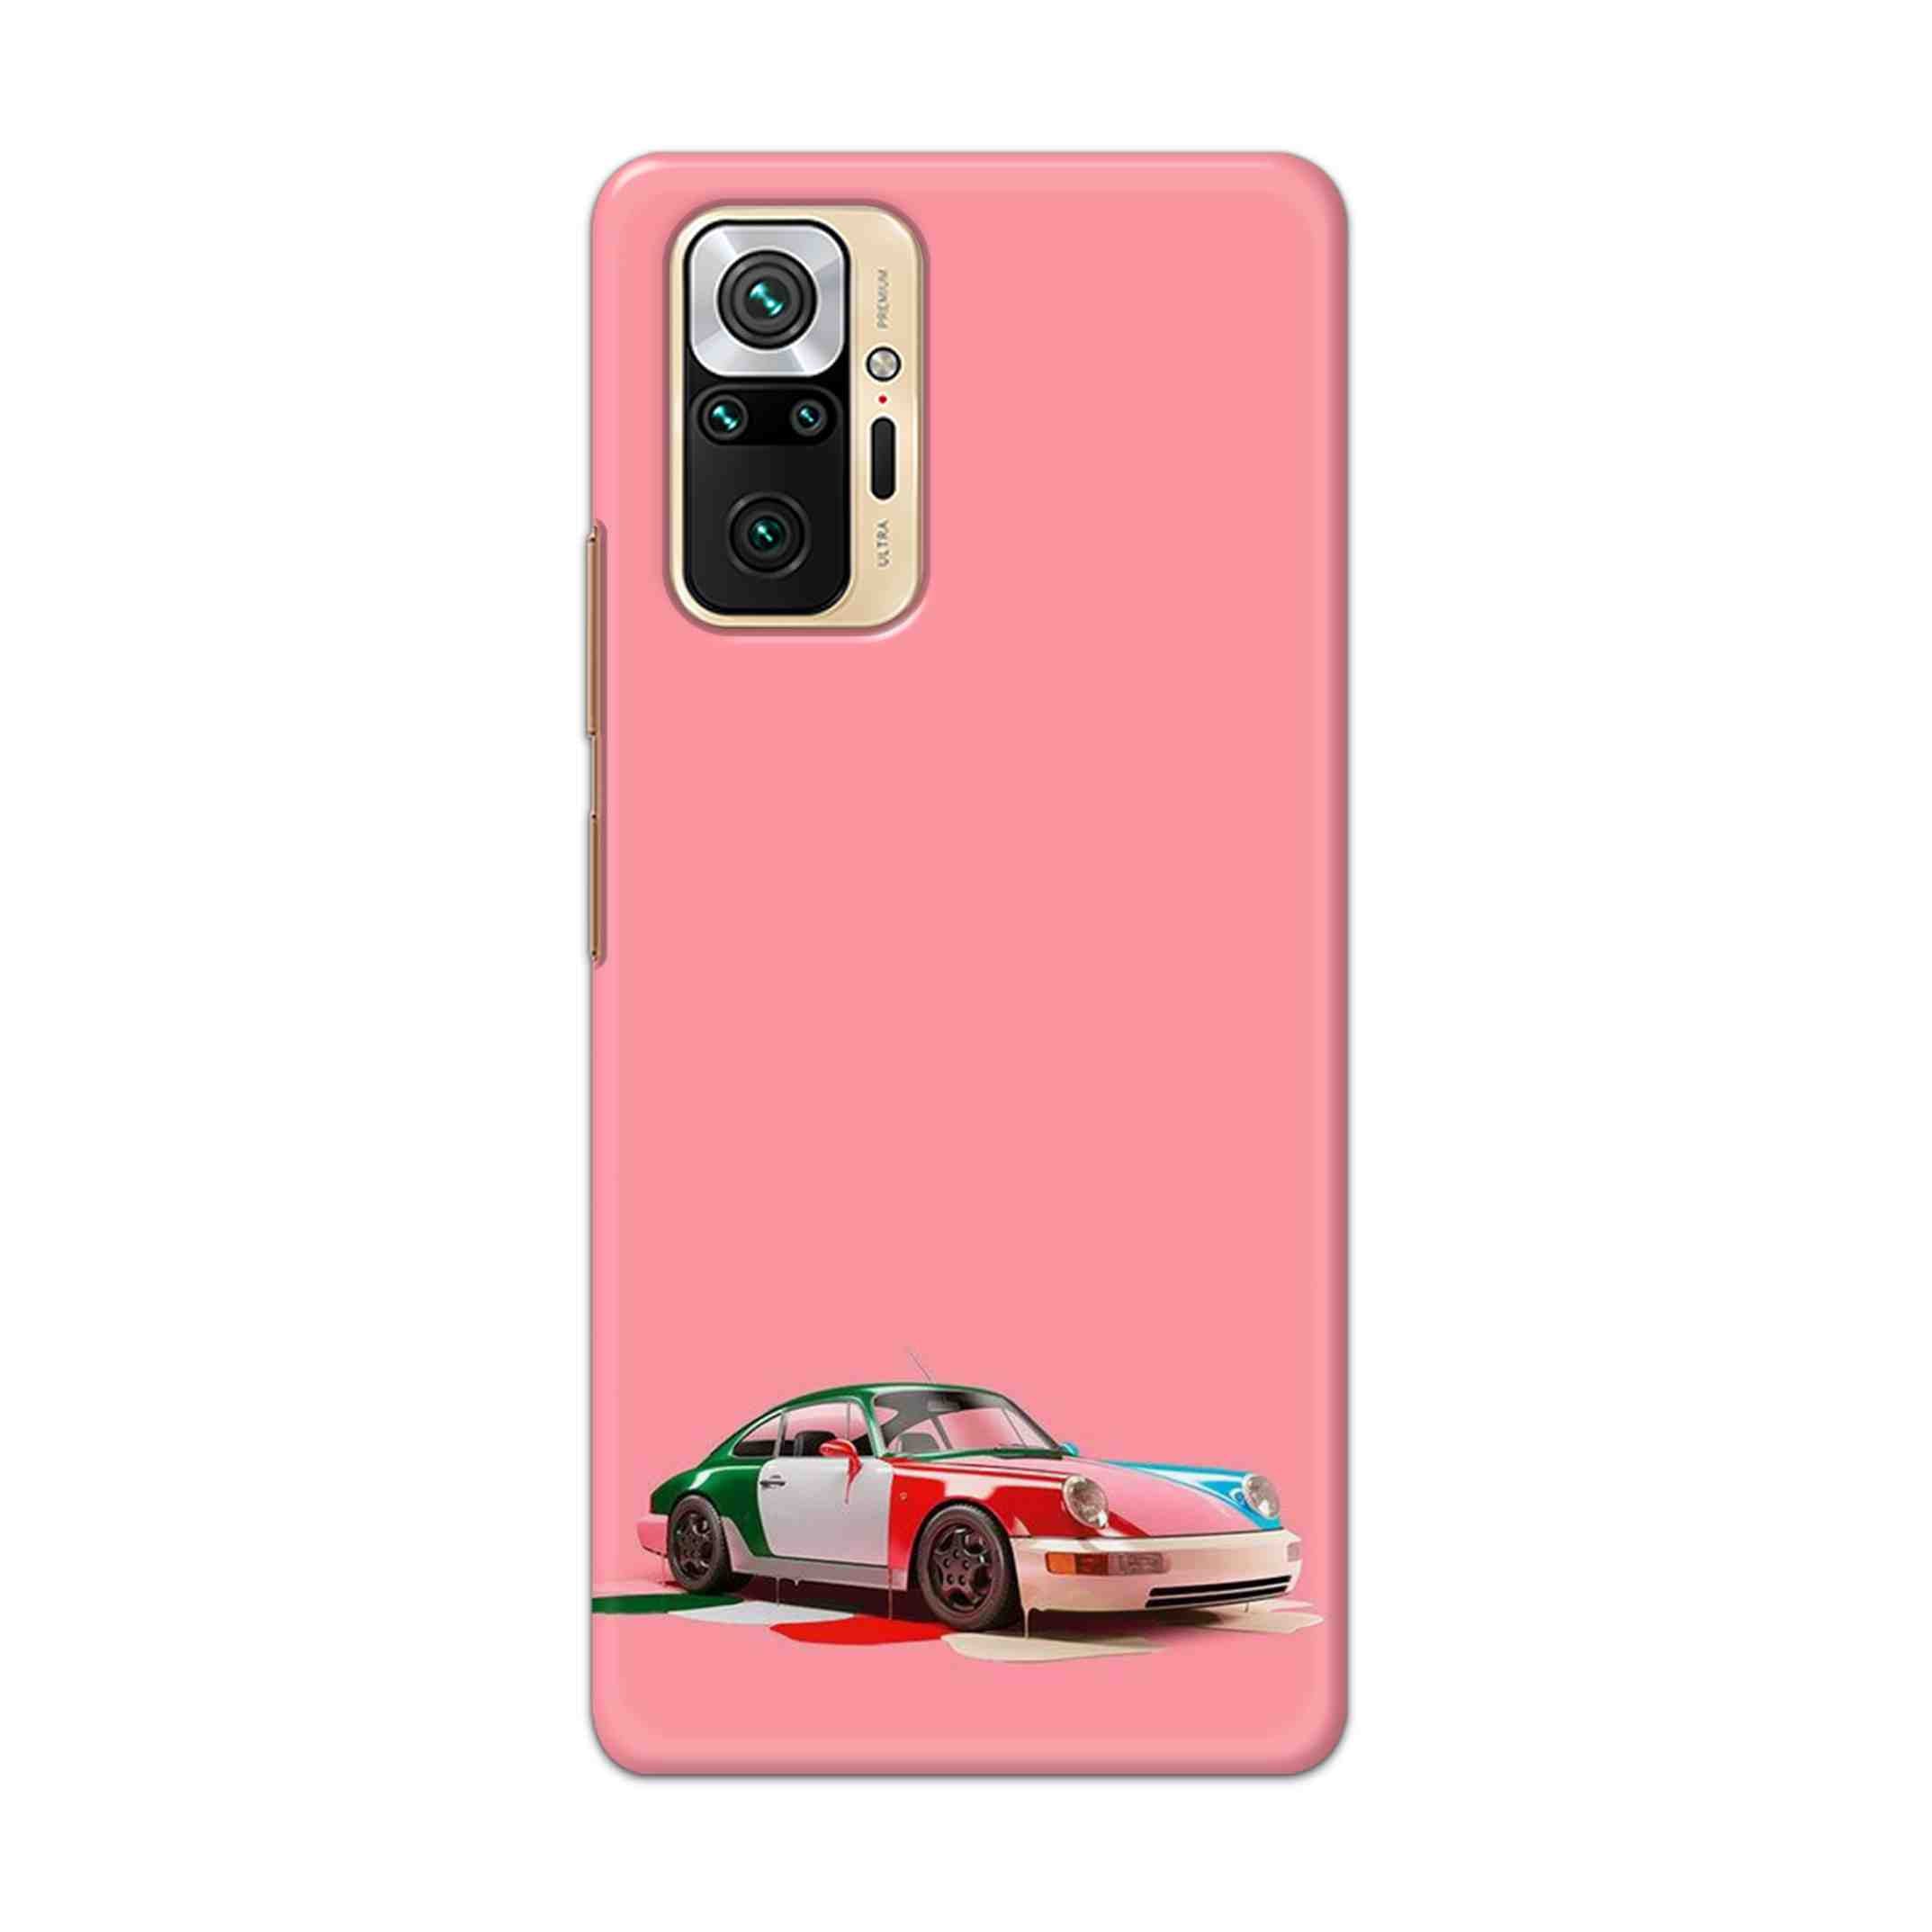 Buy Pink Porche Hard Back Mobile Phone Case Cover For Redmi Note 10 Pro Online